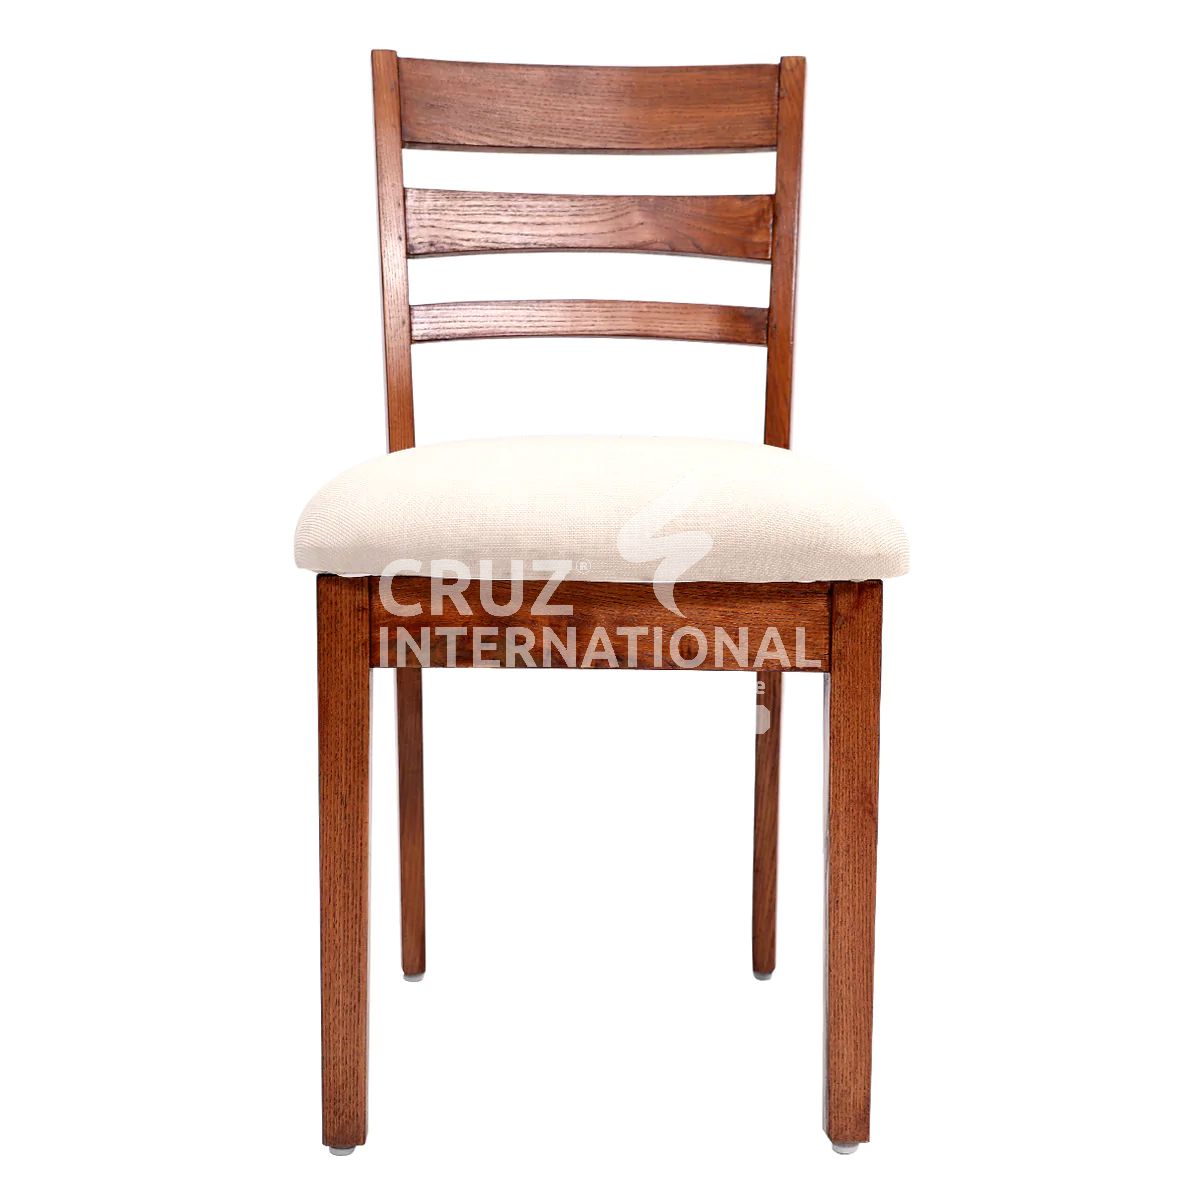 Classic Connor Benito Wooden Dinning Table | 8 Chairs & 1 Table CRUZ INTERNATIONAL